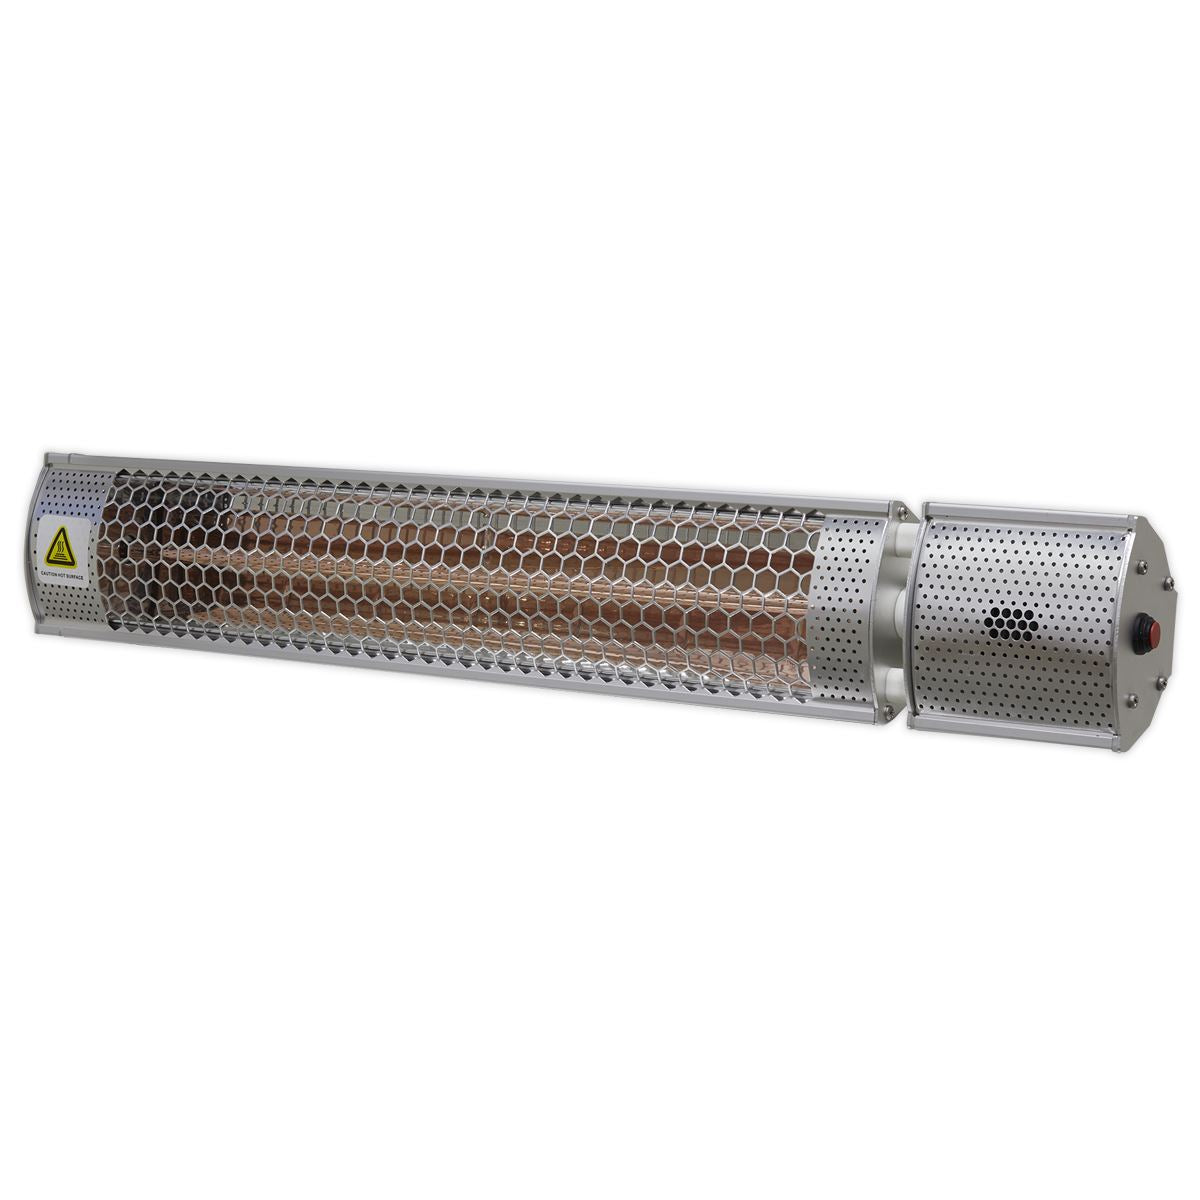 Sealey High Efficiency Infrared Short Wave Wall Mounting Heater 2000W